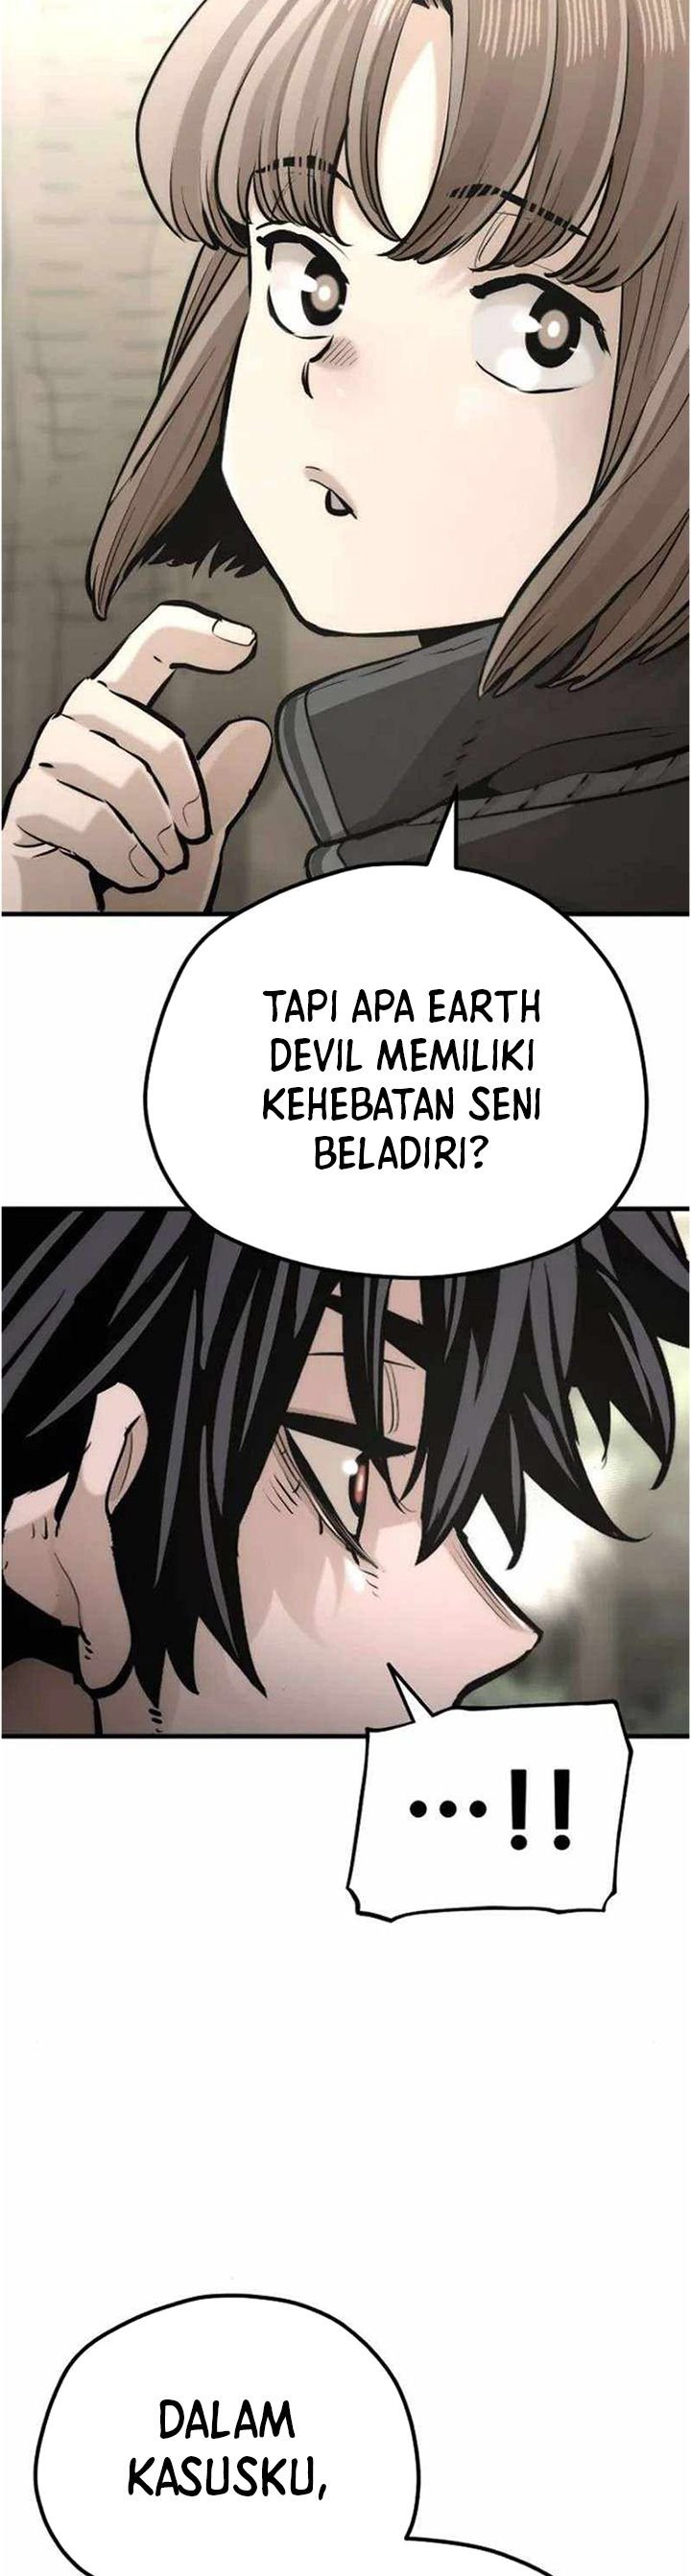 Heavenly Demon Cultivation Simulation Chapter 97 - 519